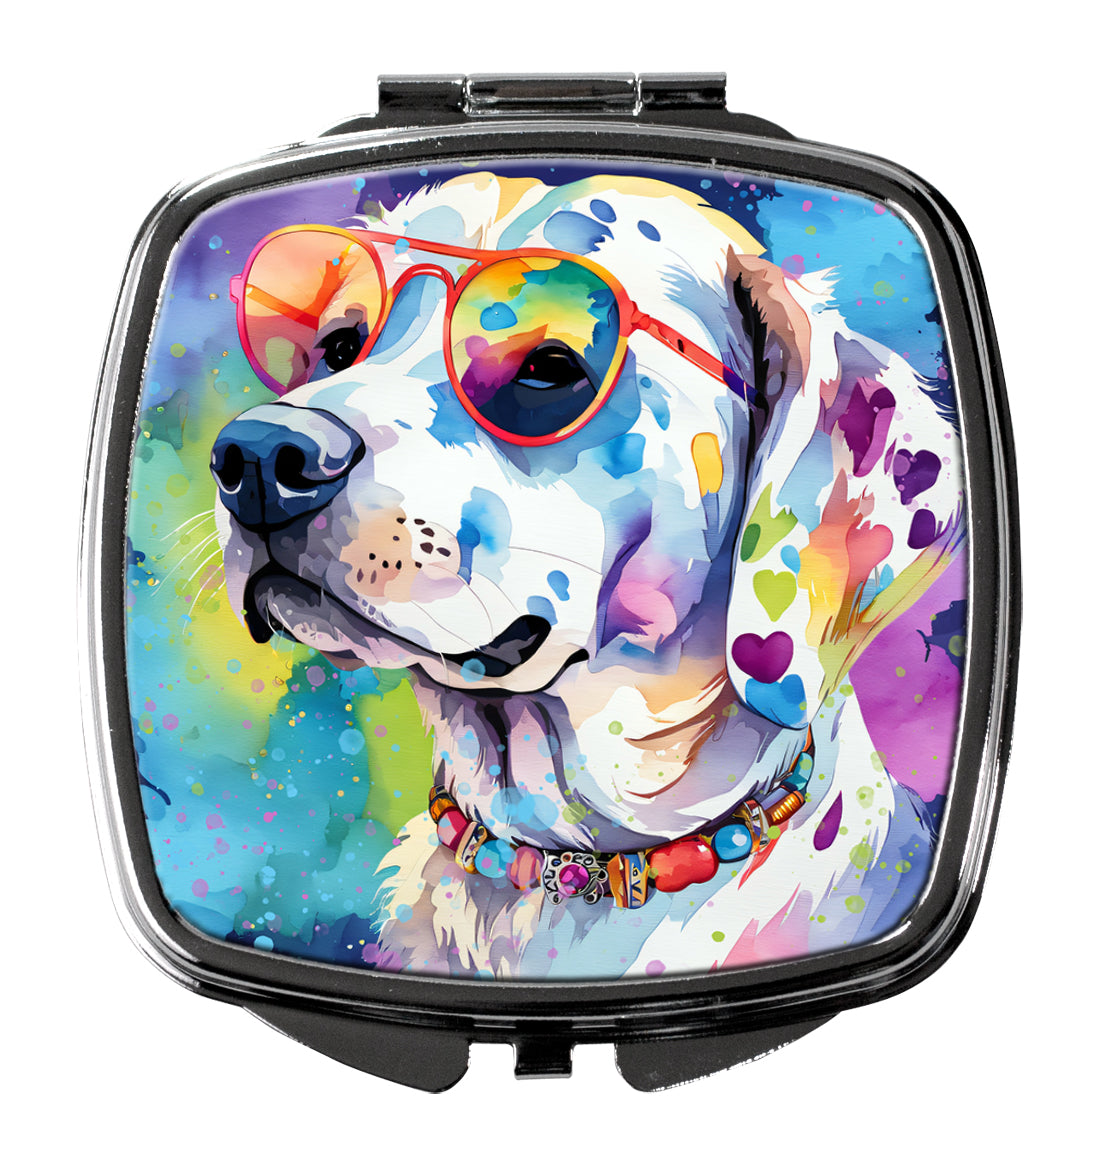 Buy this Hippie Dawg Compact Mirror